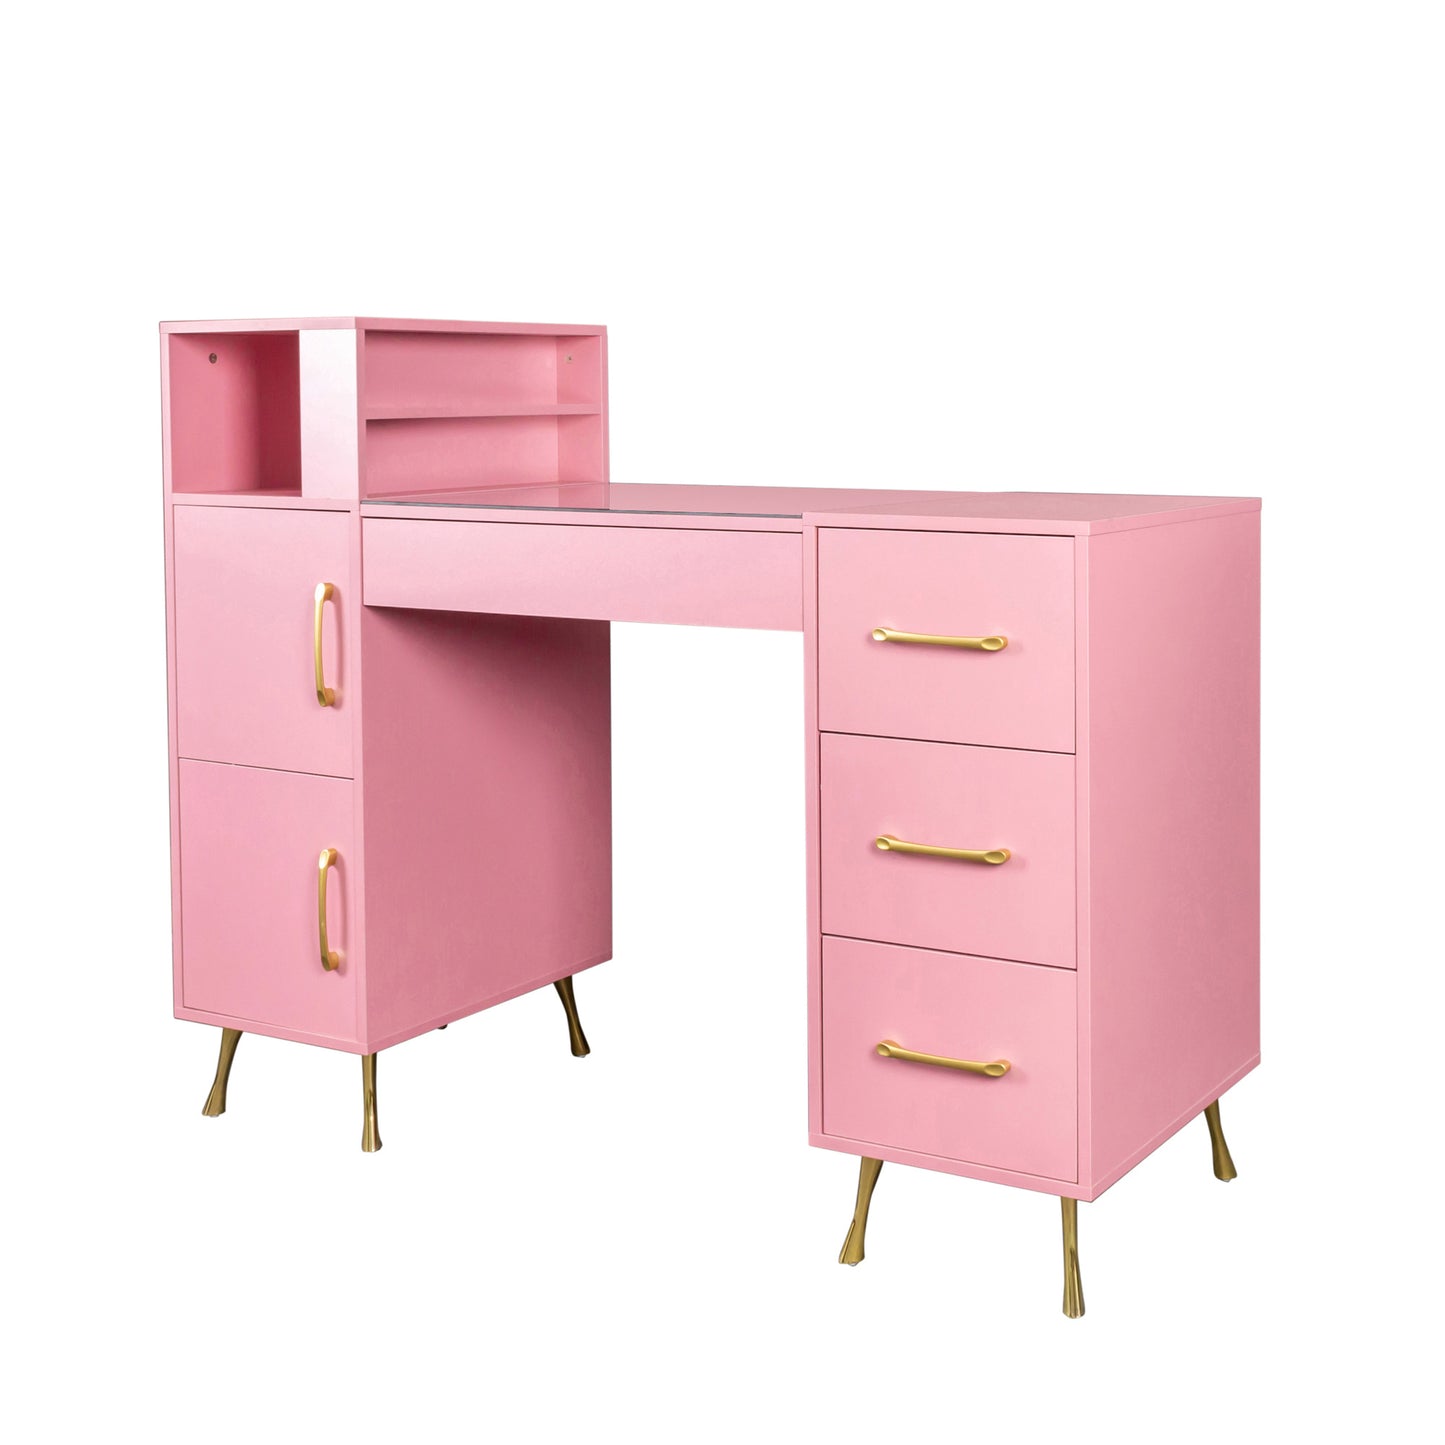 Manicure Table, Nail Makeup Desk with Drawers